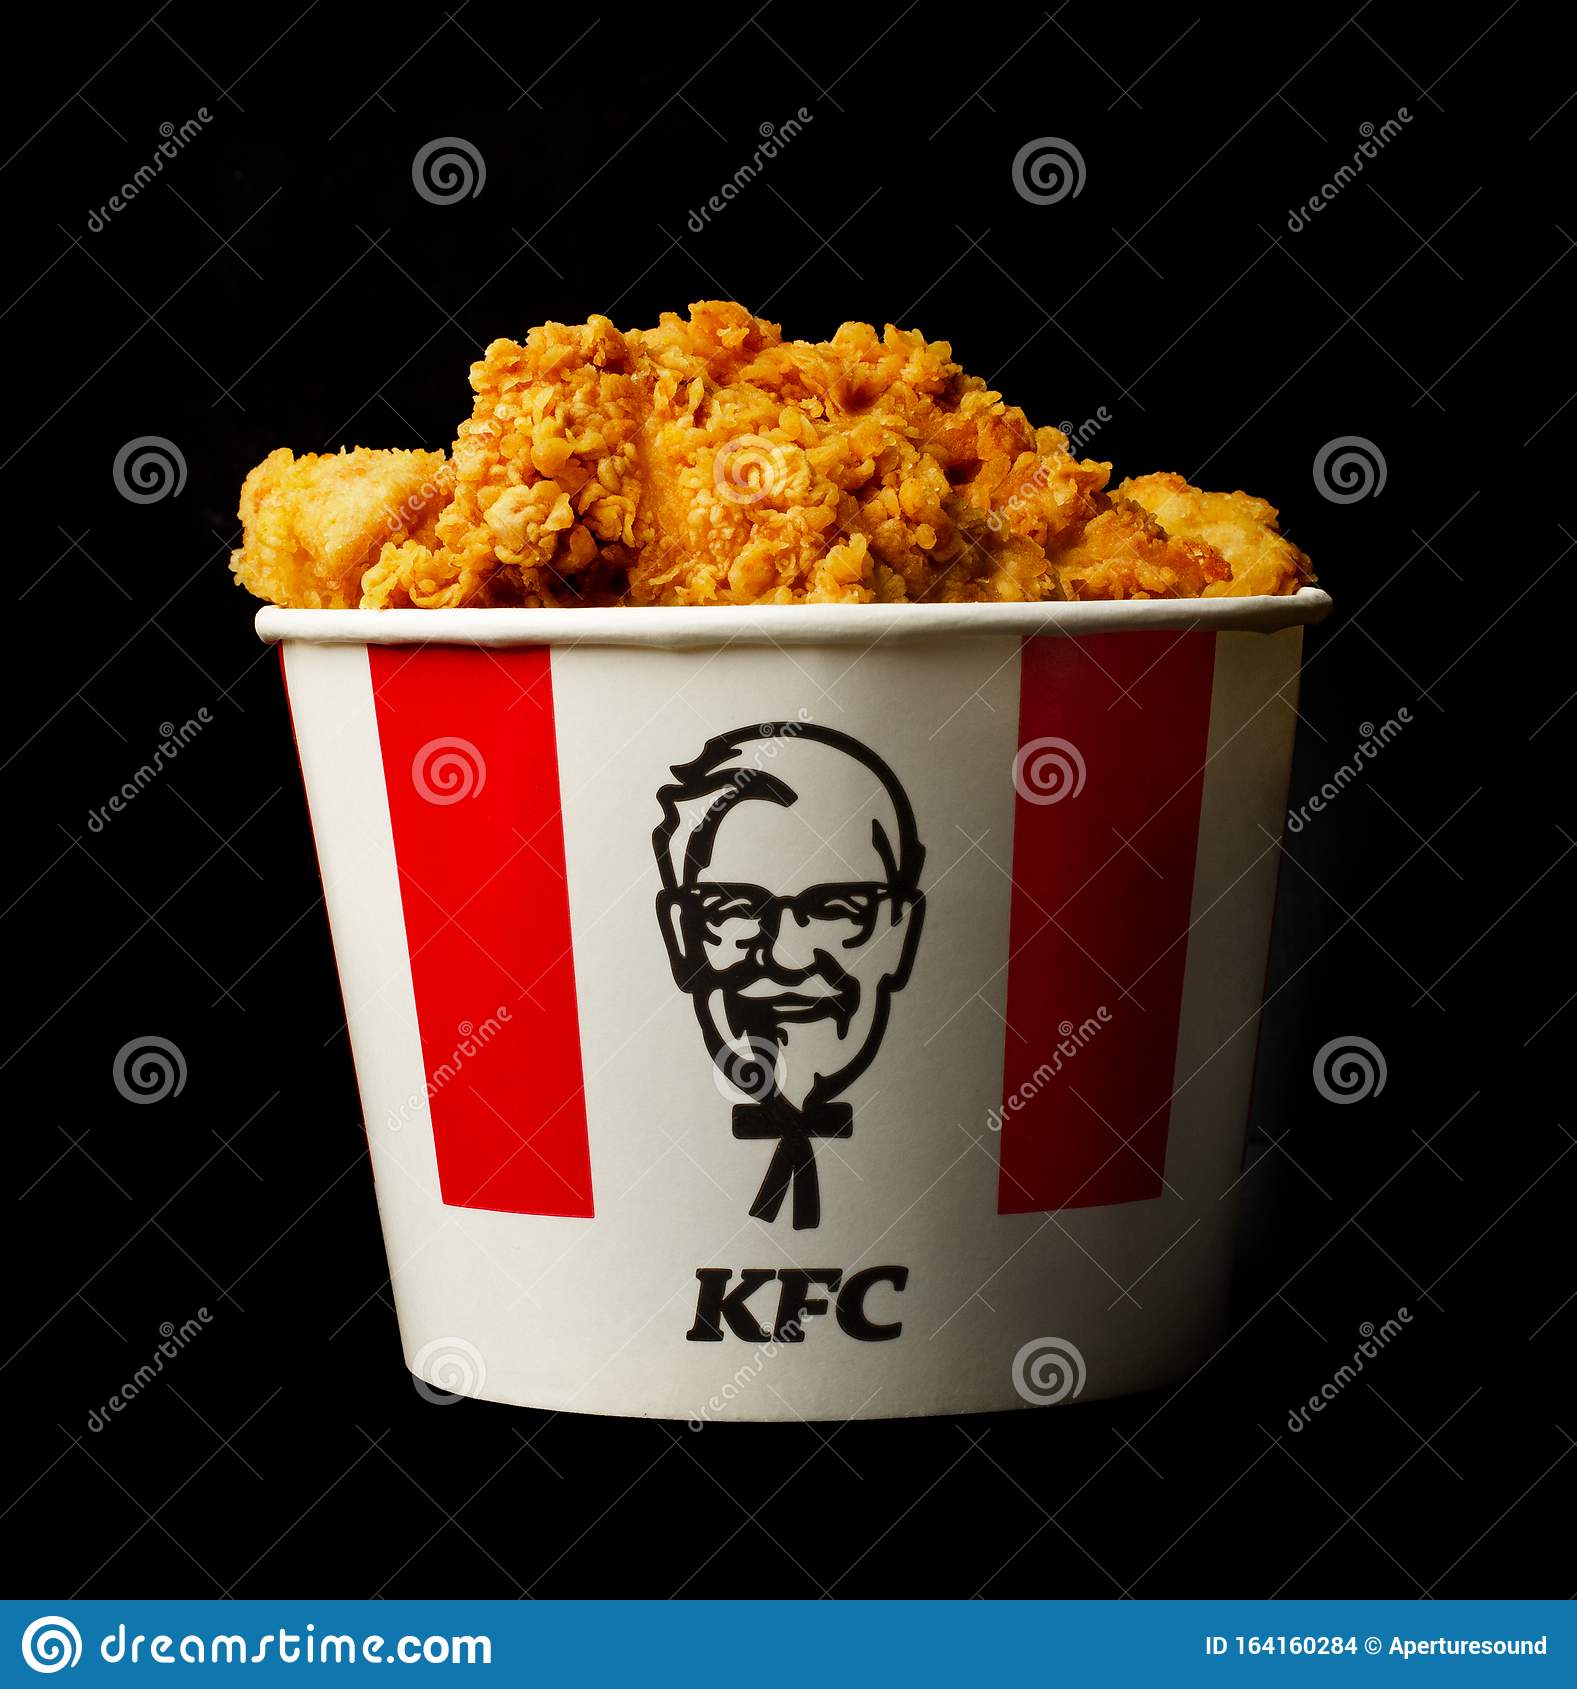 Detail Kfc Pictures Of Food Nomer 31